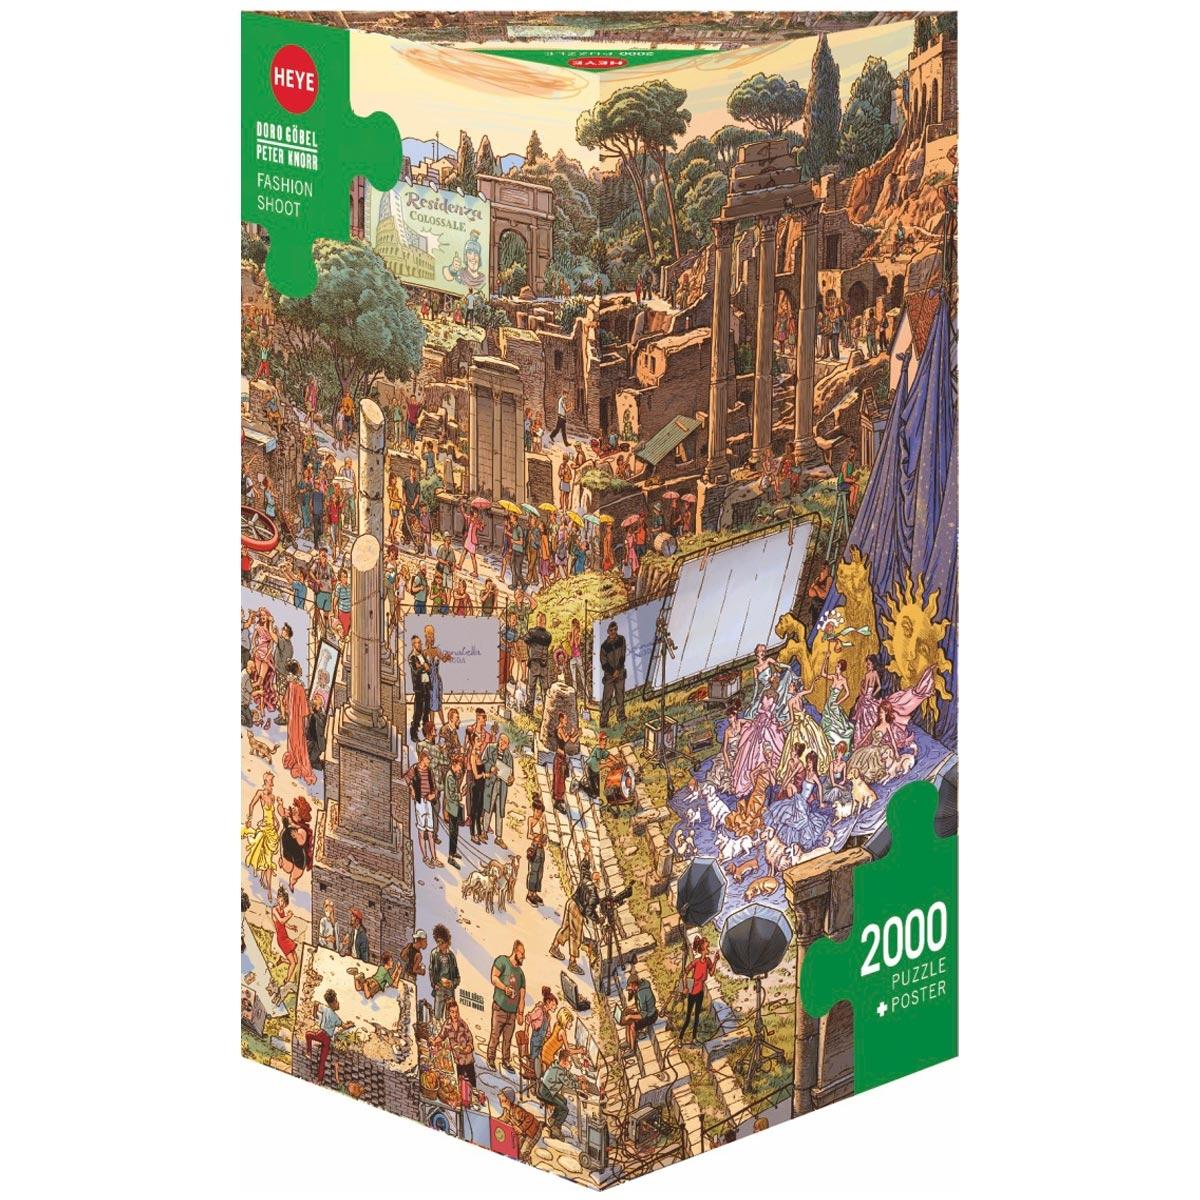 Selected image for HEYE  Puzzle 2000 delova Triangle Gobel/Knorr Fashion Shoot 29931